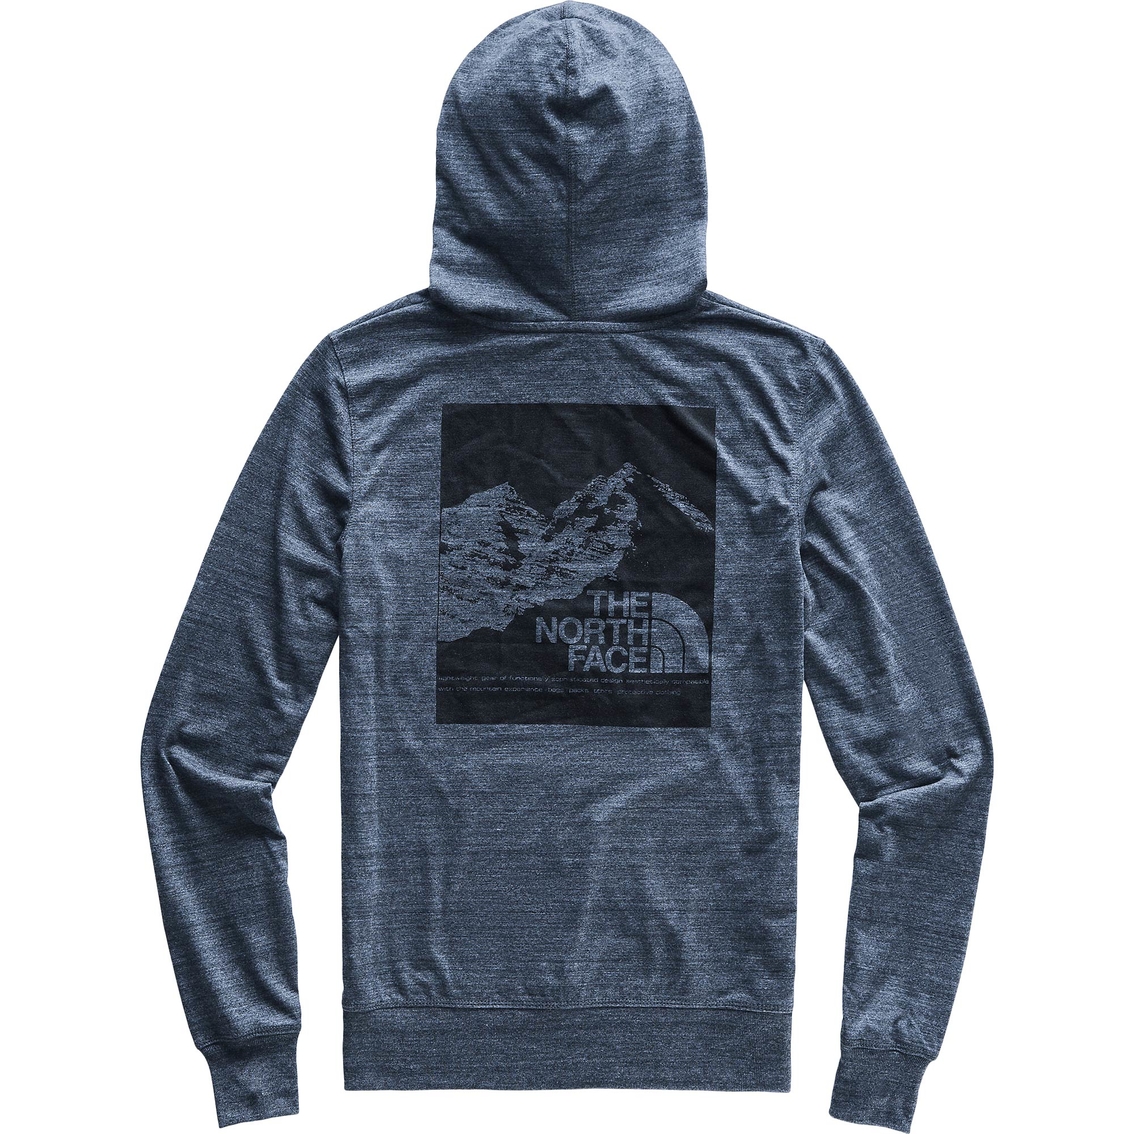 The North Face Vintage Pyrenees Lightweight TriBlend Pullover Hoodie - Image 2 of 2